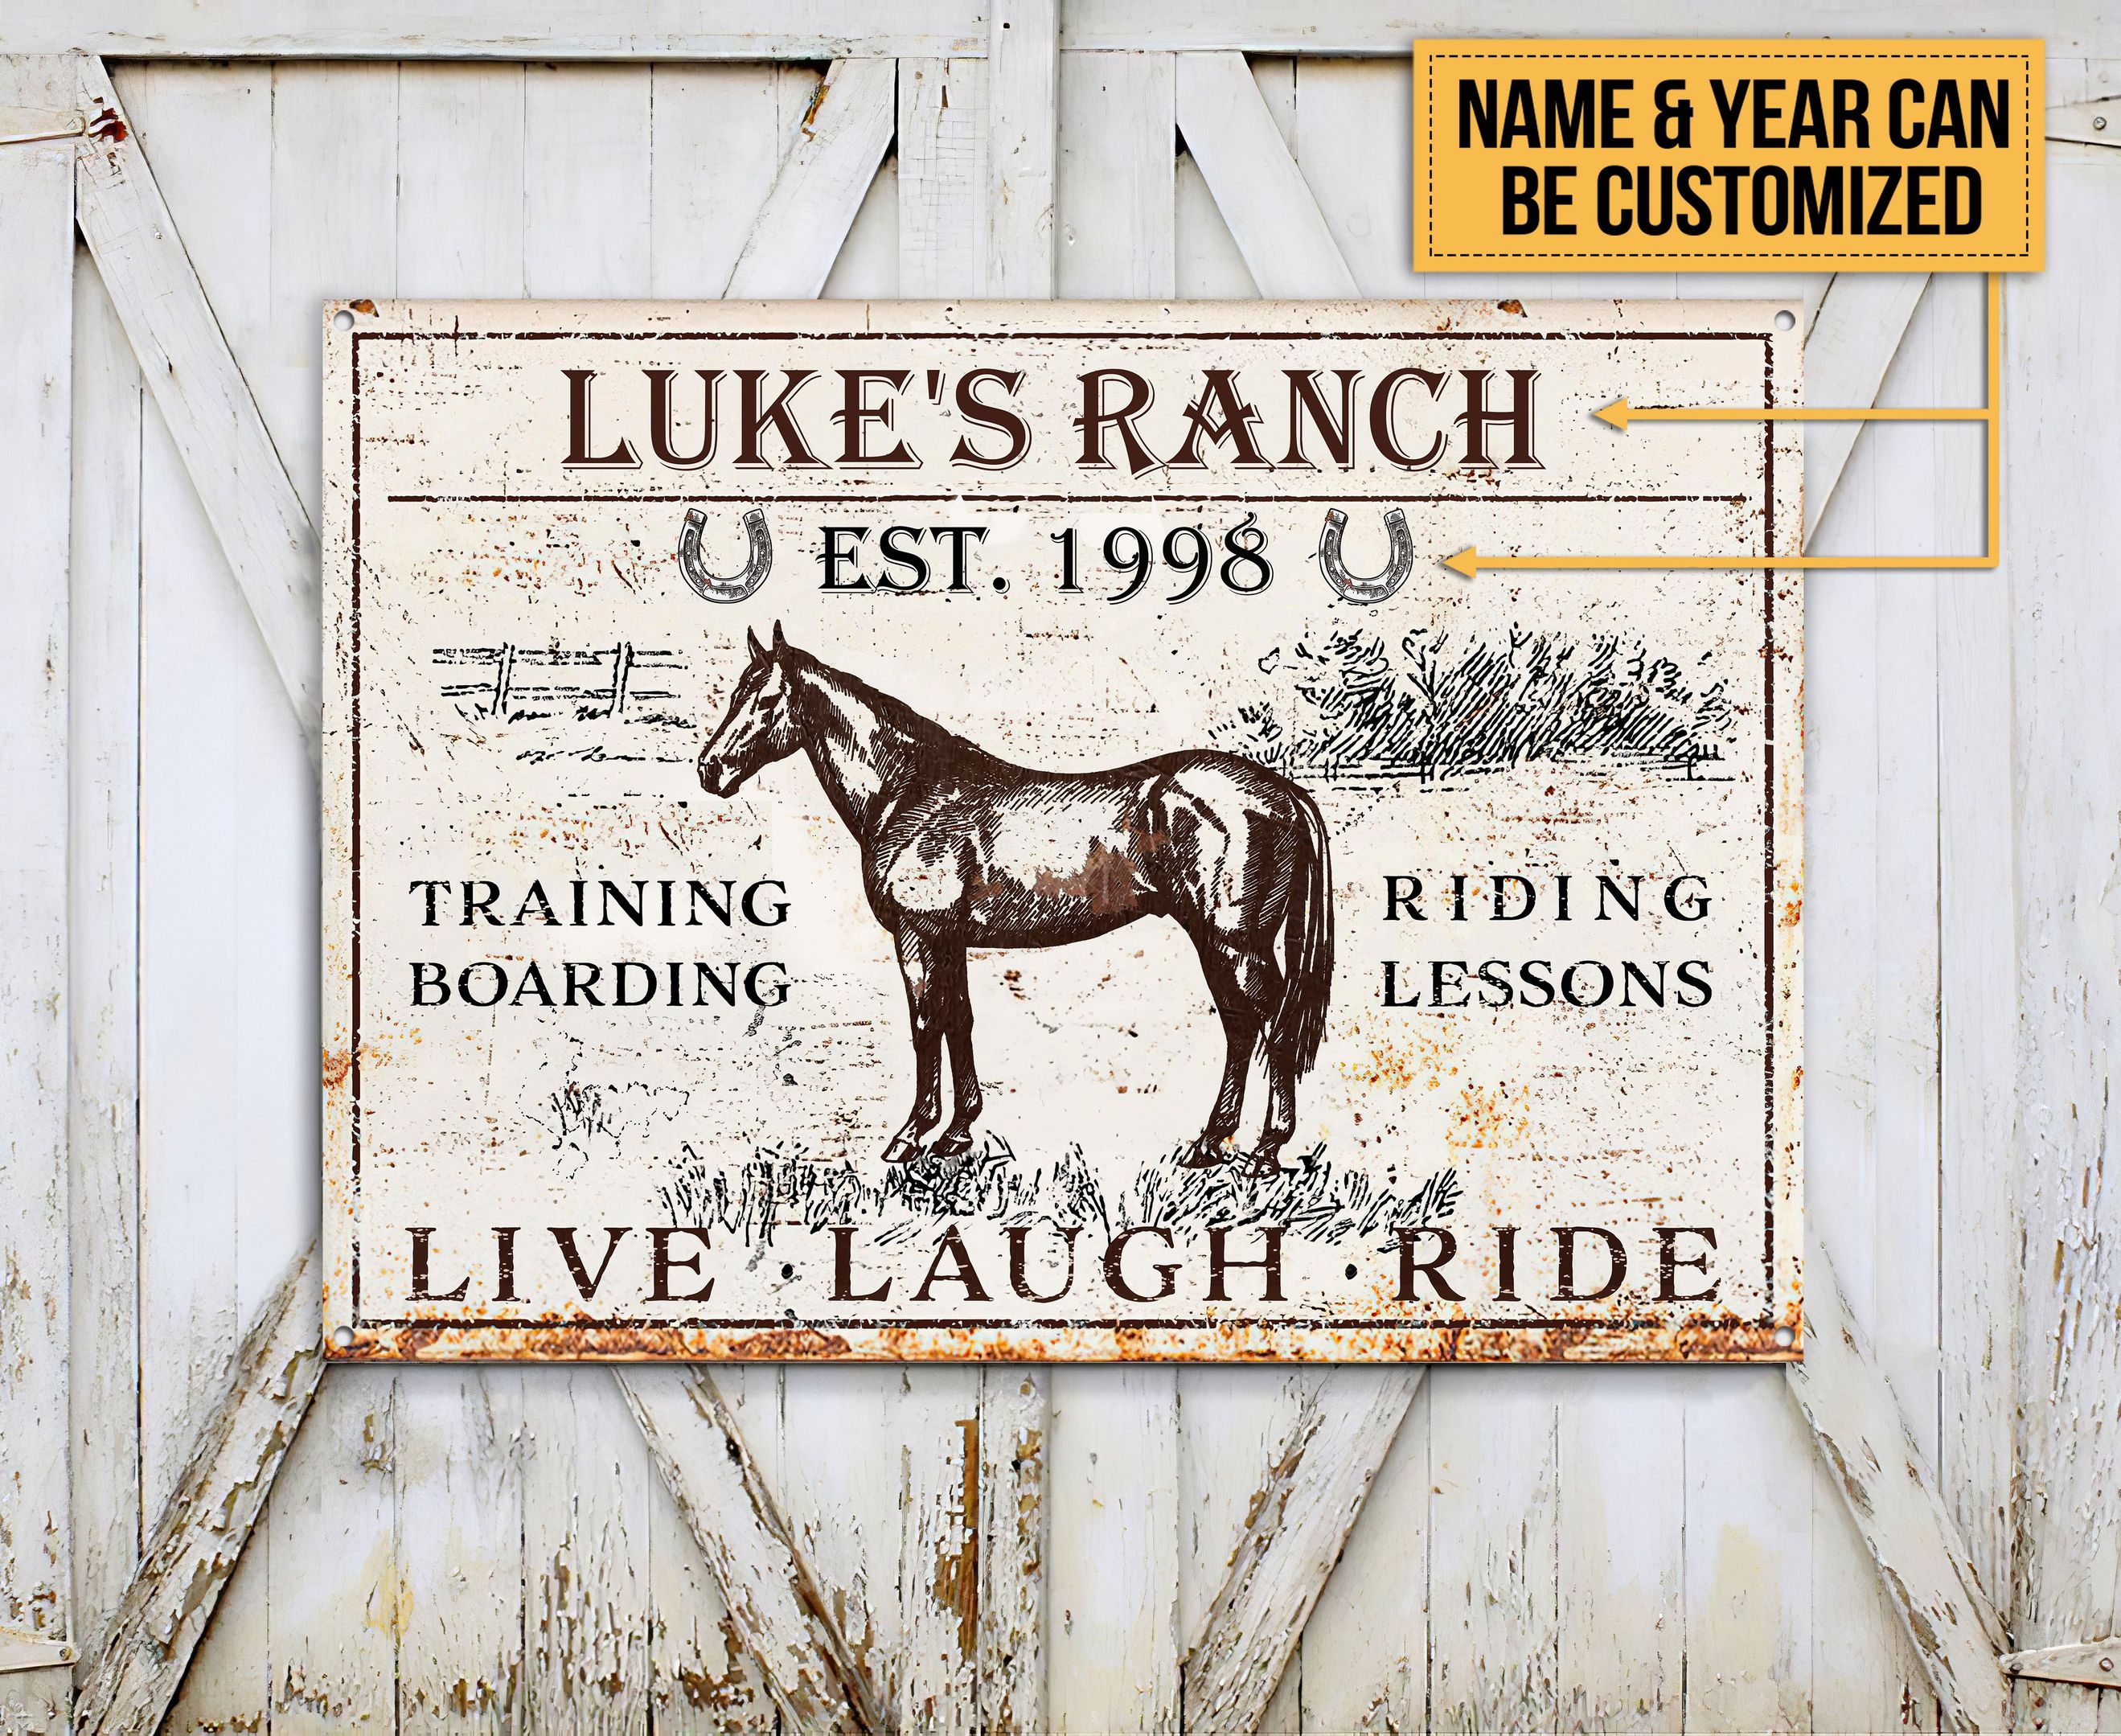 Personalized Horse Training Boarding Customized Classic Metal Signs